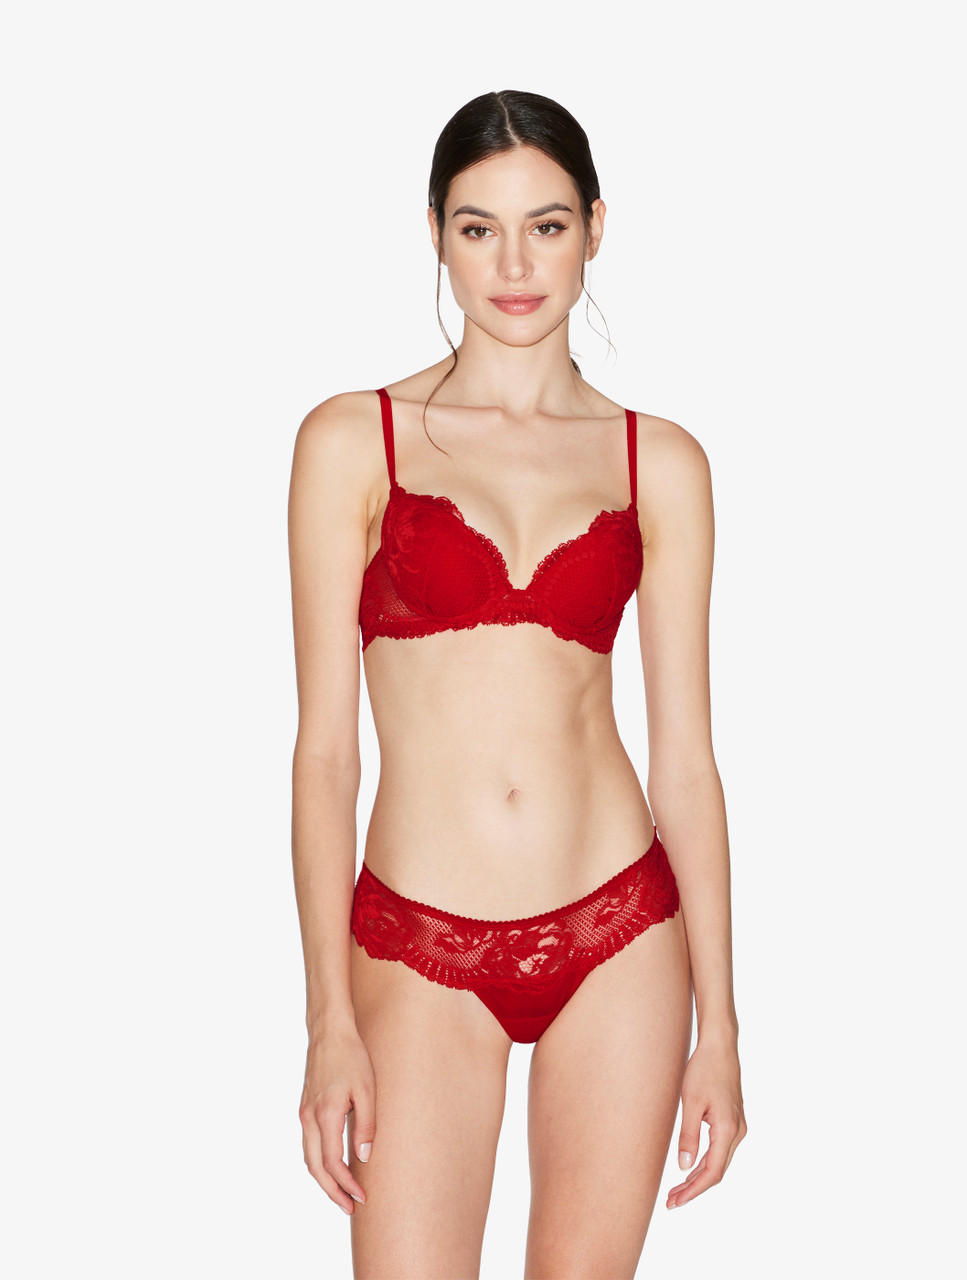 Push-Up-BH Newia Rot - Jetzt bei Andalous Dessous